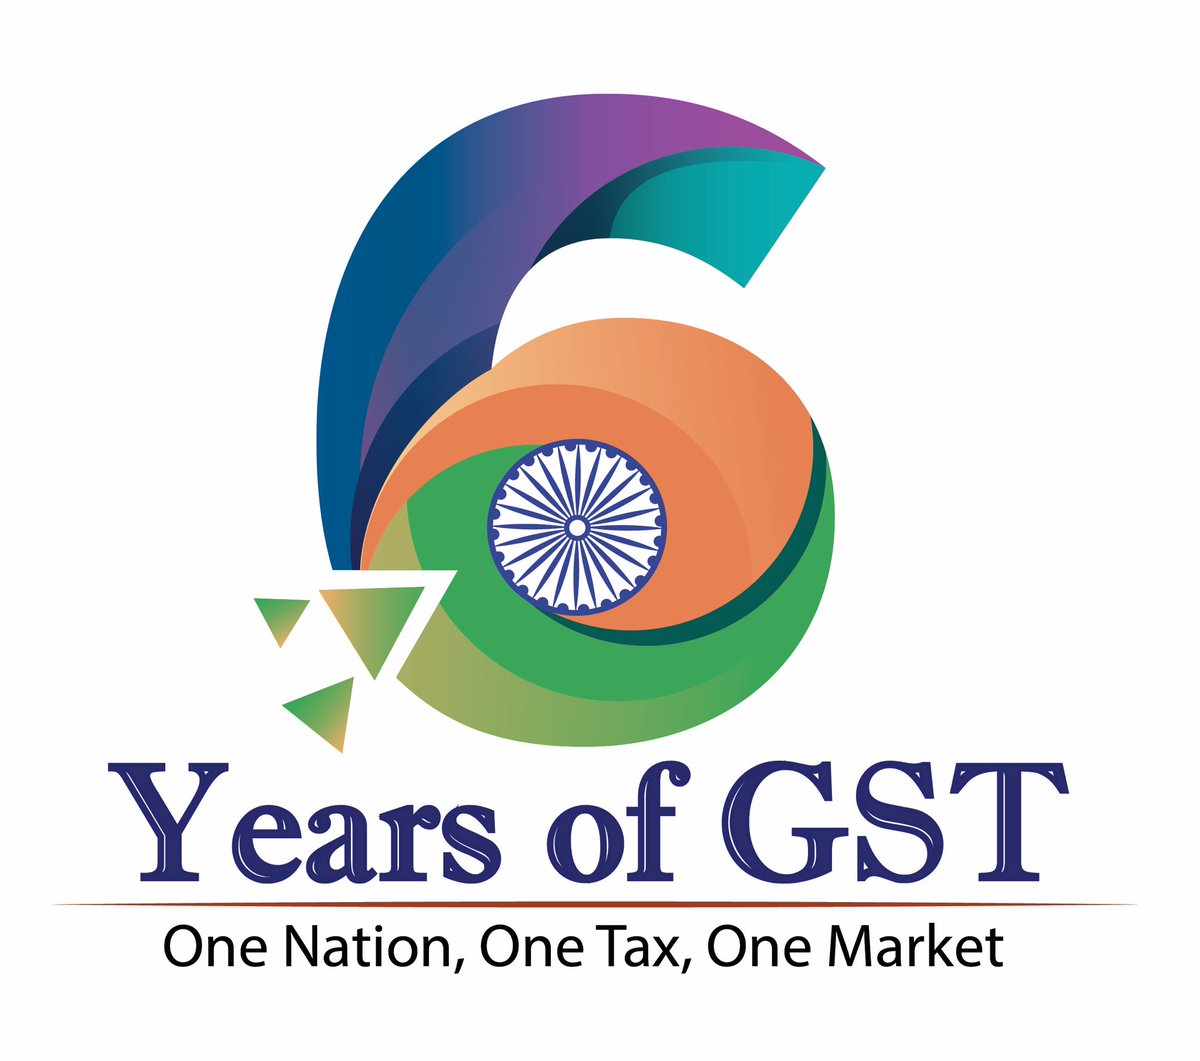 छह वर्ष जीएसटी के ।
सरलीकृत कर, समग्र विकास ।

Six Years of GST.
Simplifying Taxes, Driving Growth.

#6YearsofGST